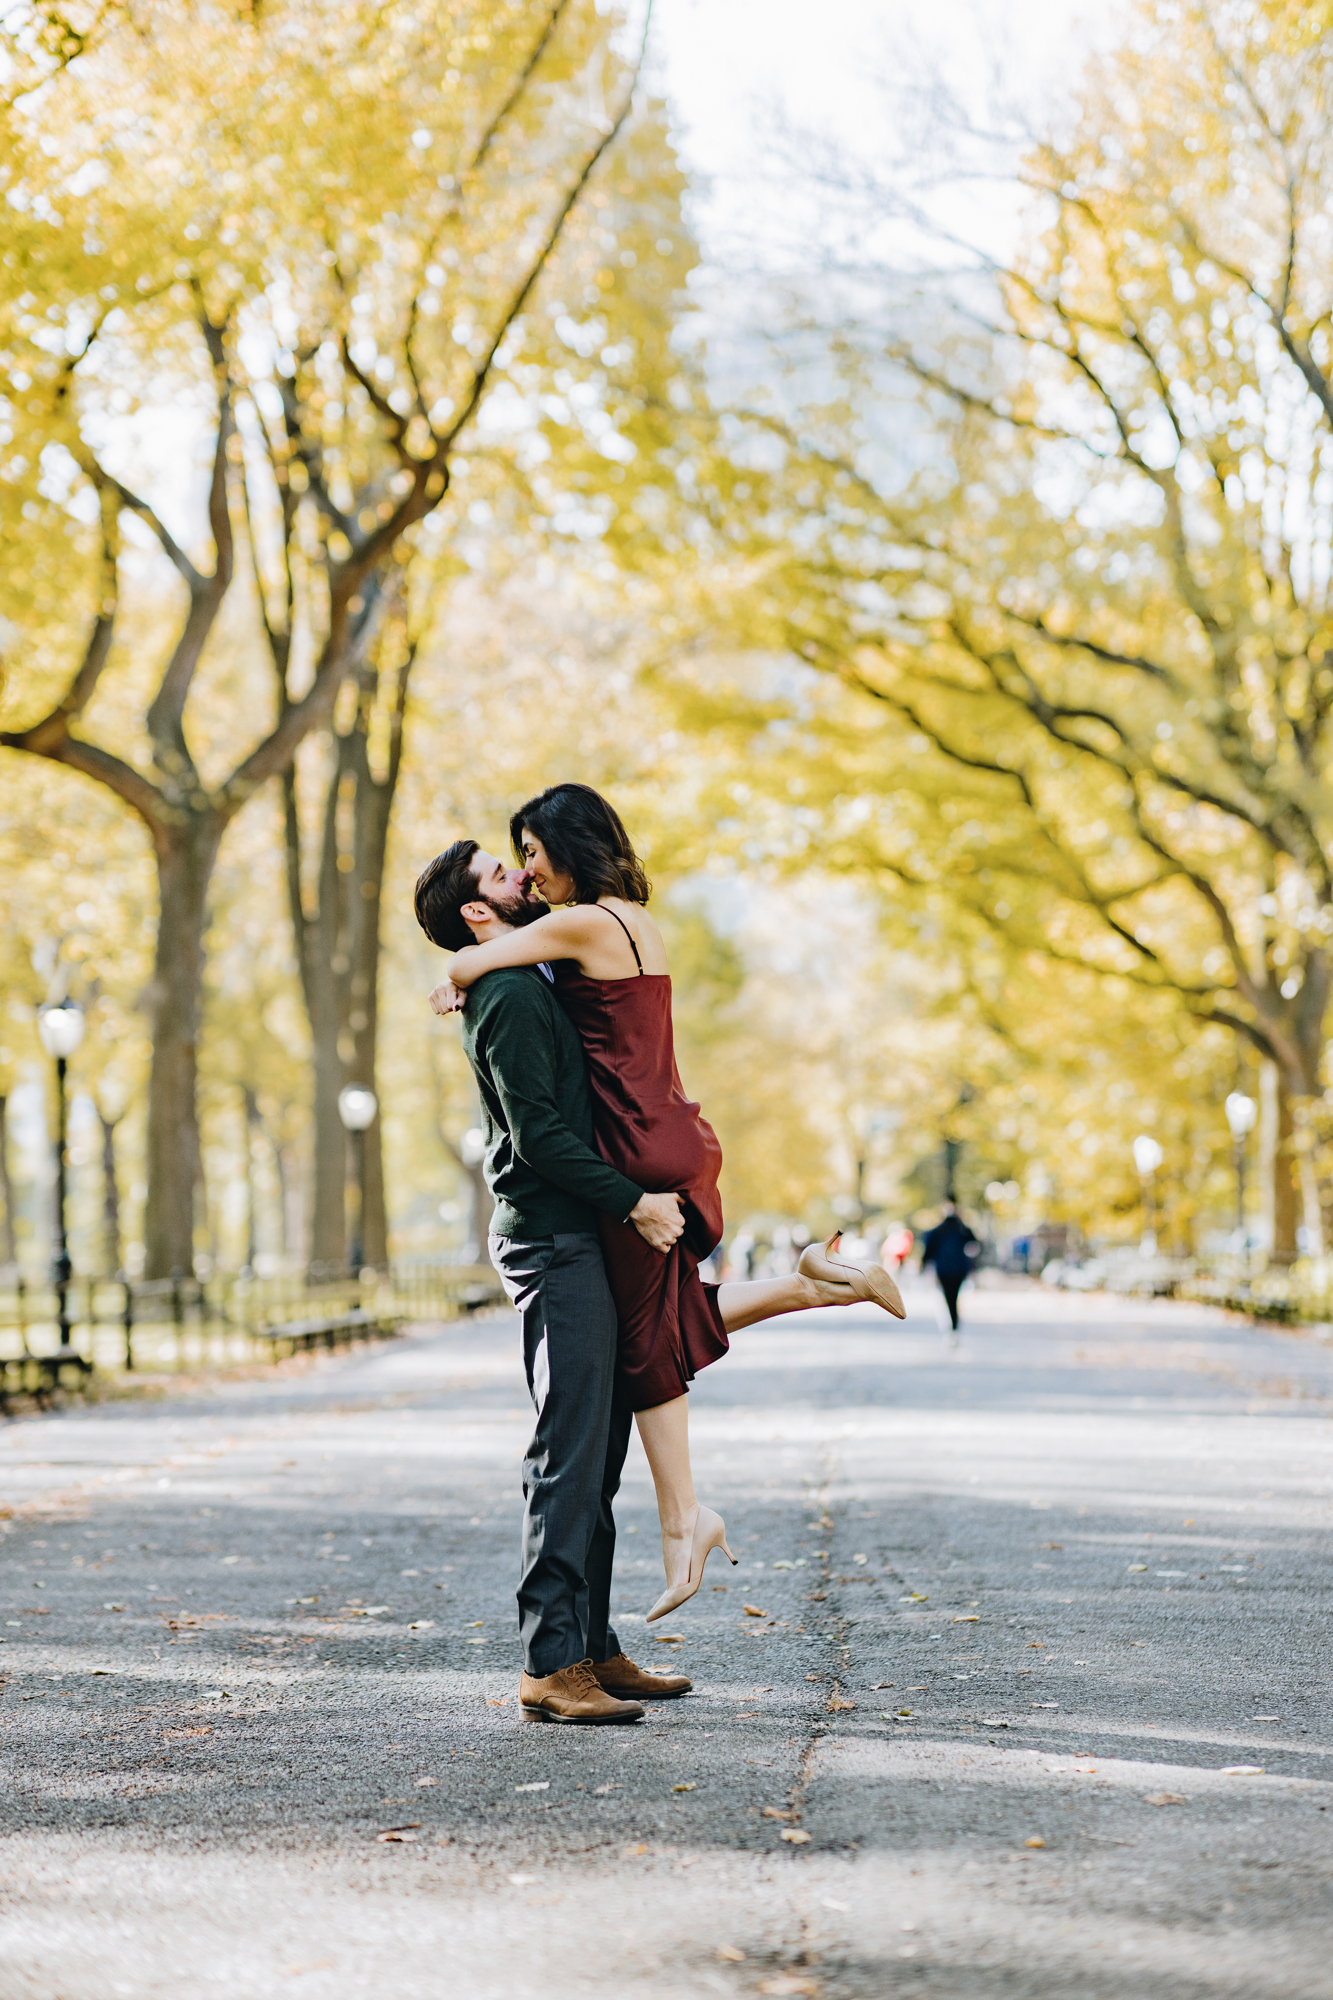 Timeless Central Park Engagement Photos in Fall